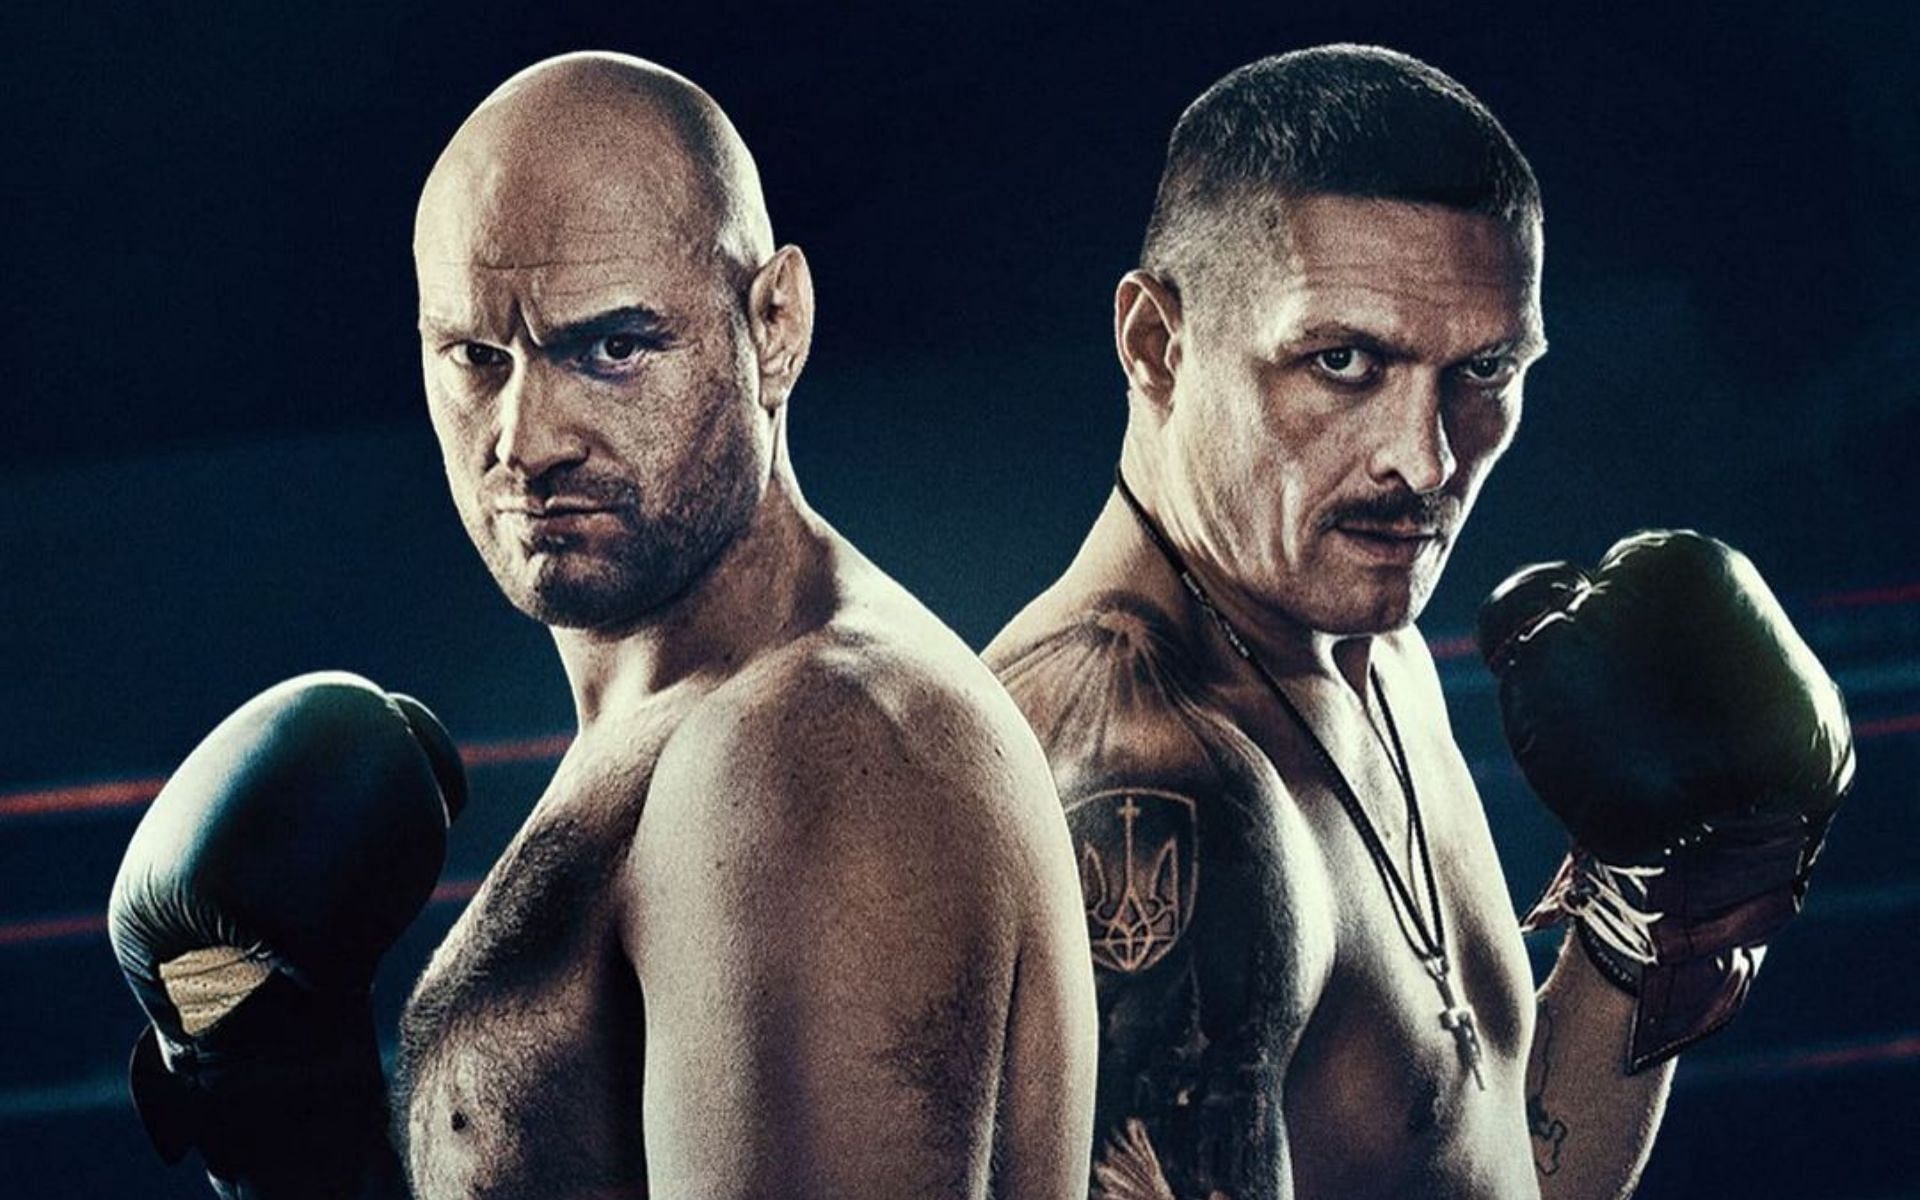 Tyson Fury (left) and Oleksandr Usyk (right) will look to make history by capturing boxing